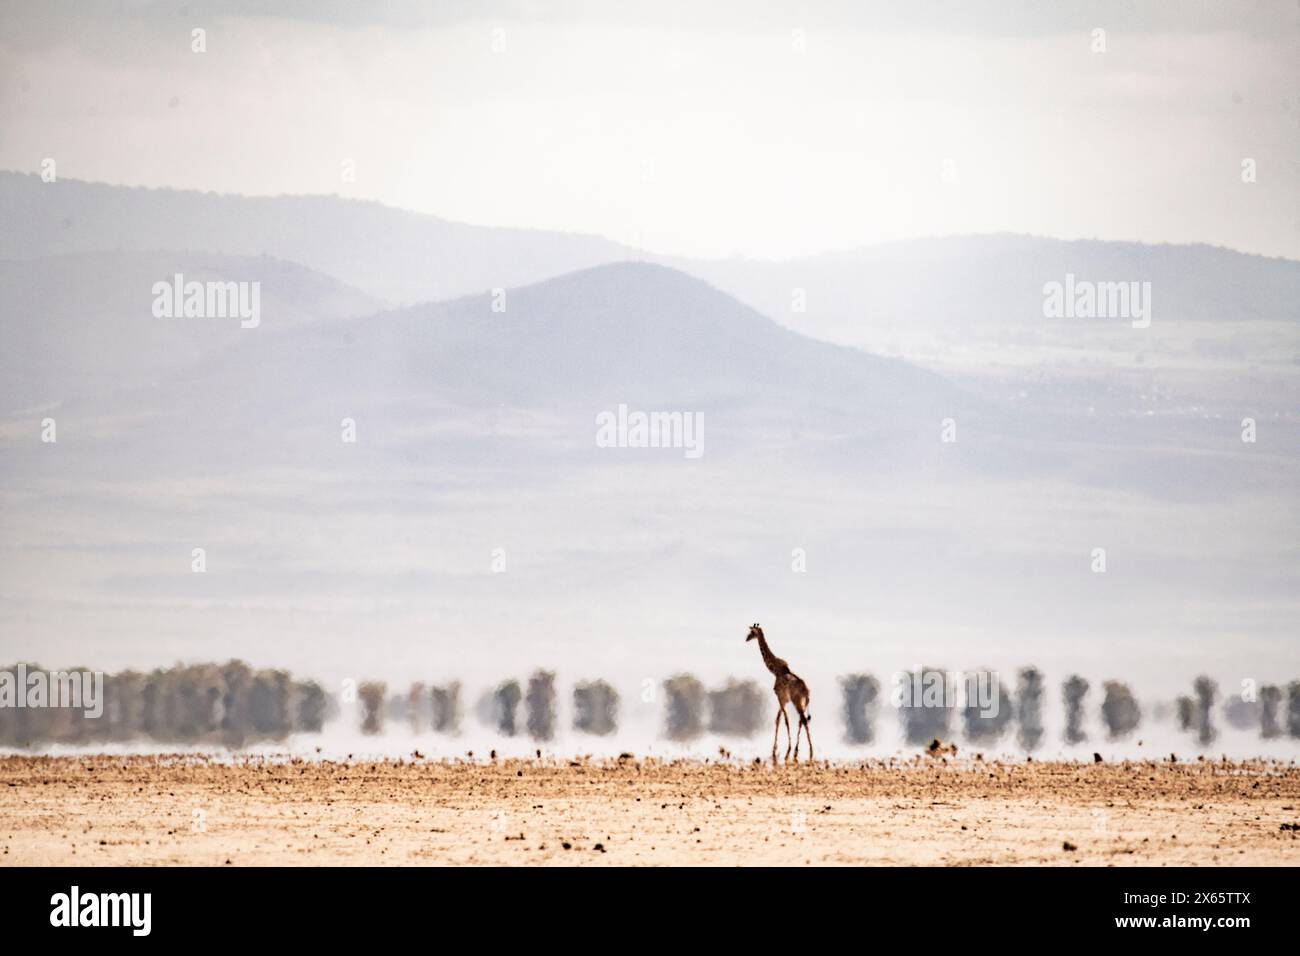 A lone giraffe seems like a mirage, distorted by the heat rising Stock Photo